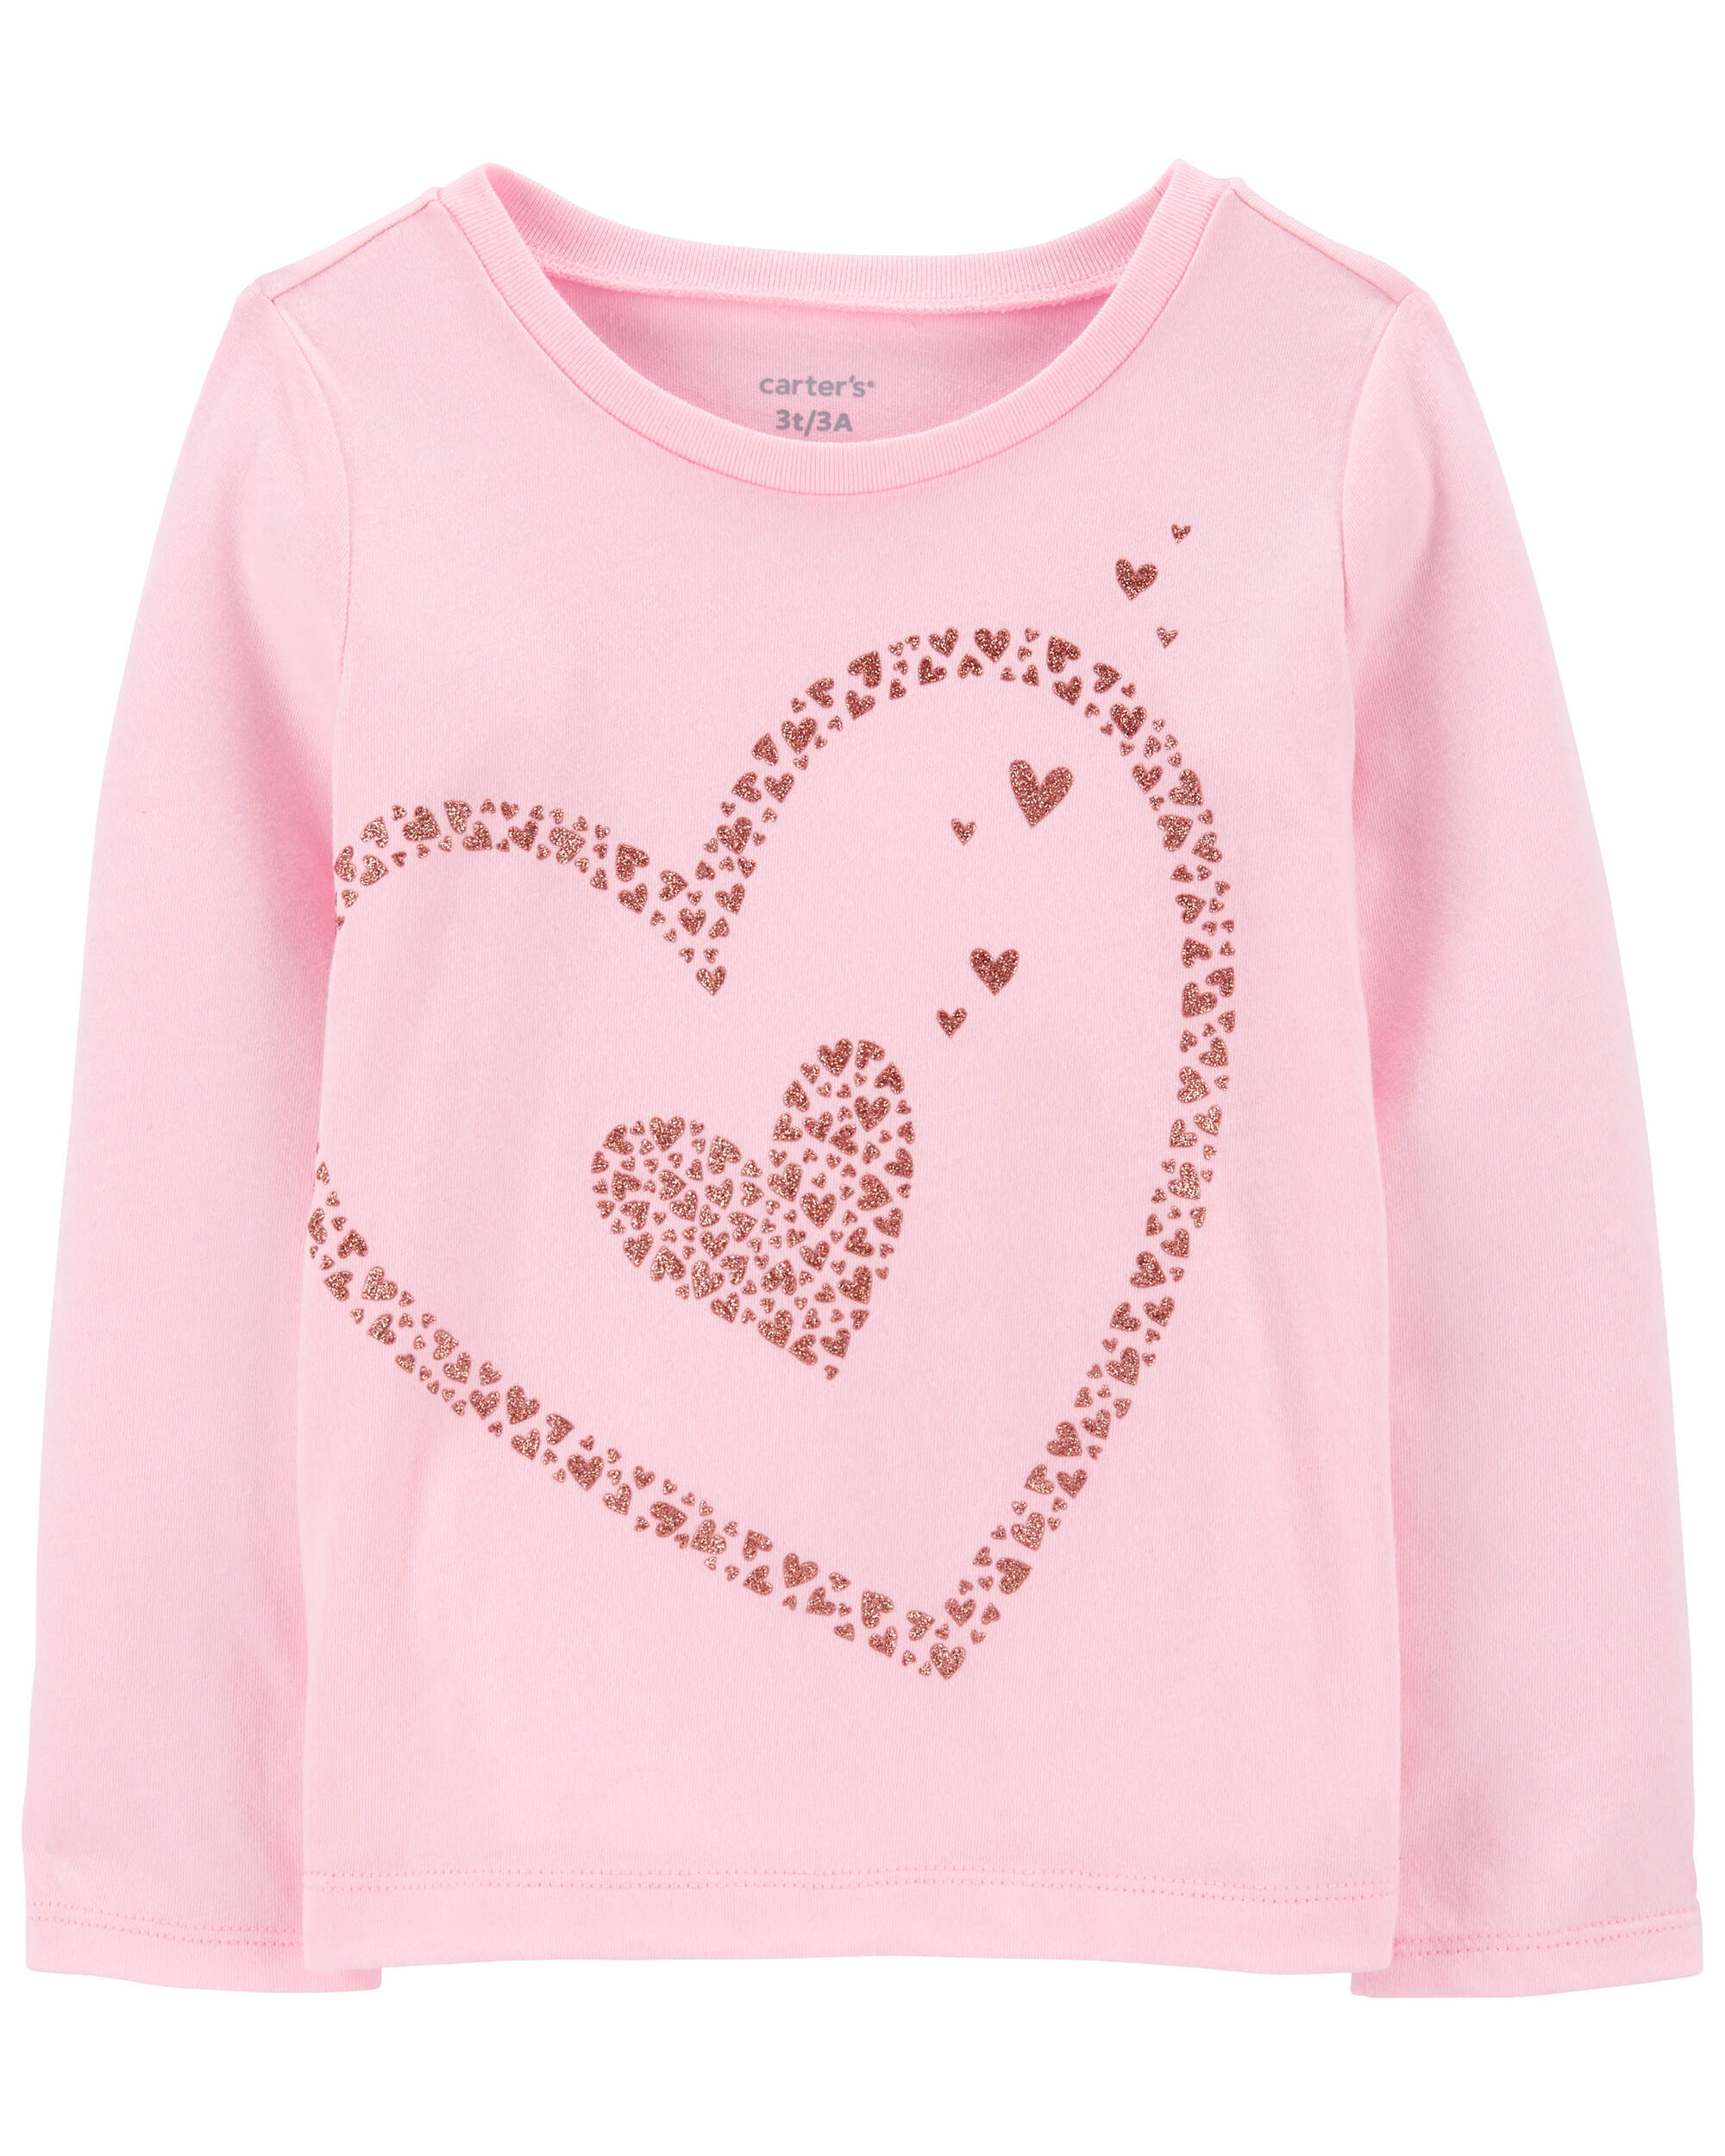 Toddler Heart Long-Sleeve Graphic Tee